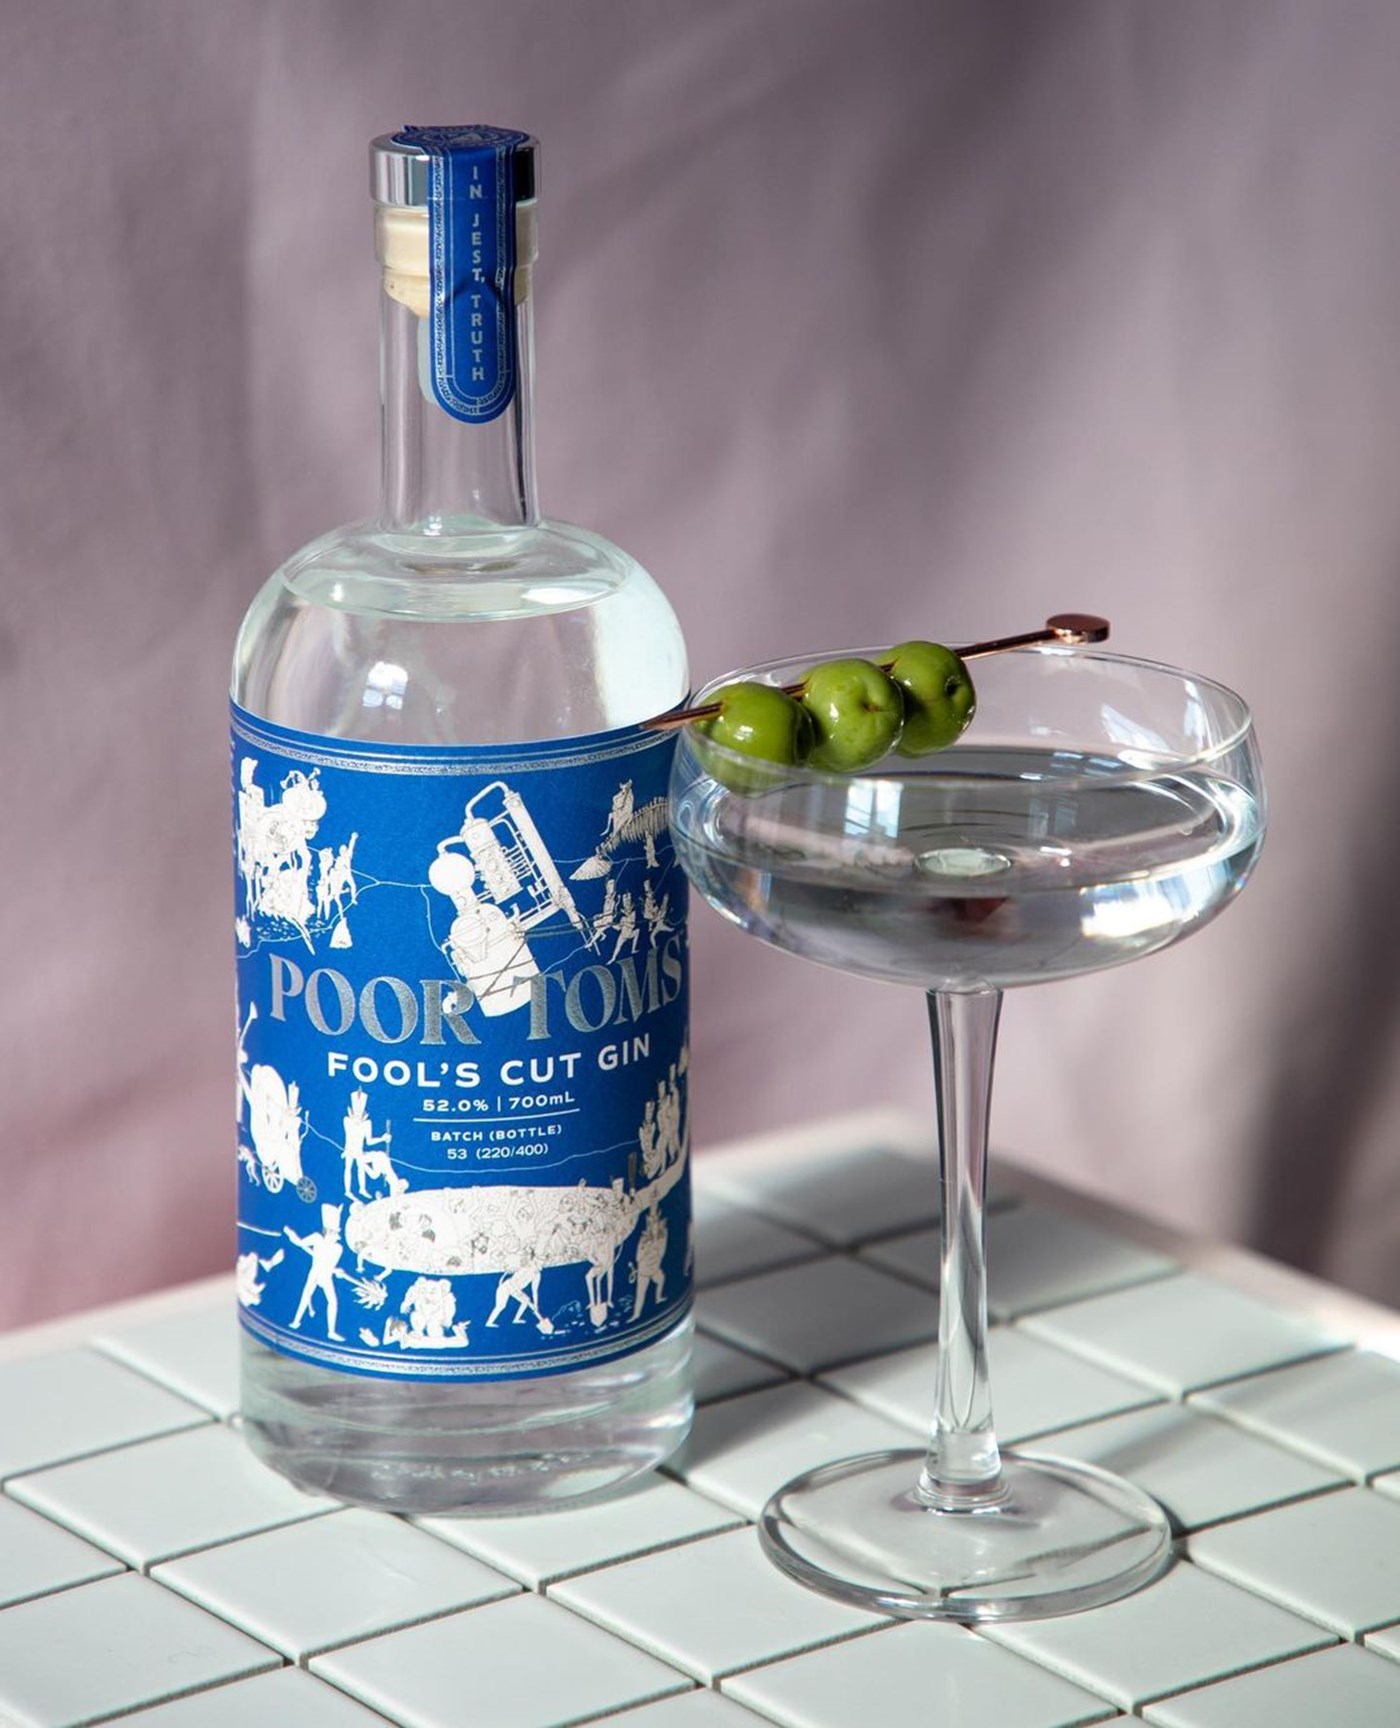 A bottle of Fool's Cut Gin with a blue and white label next to a cocktail in a martini glass atop a tiled bench 